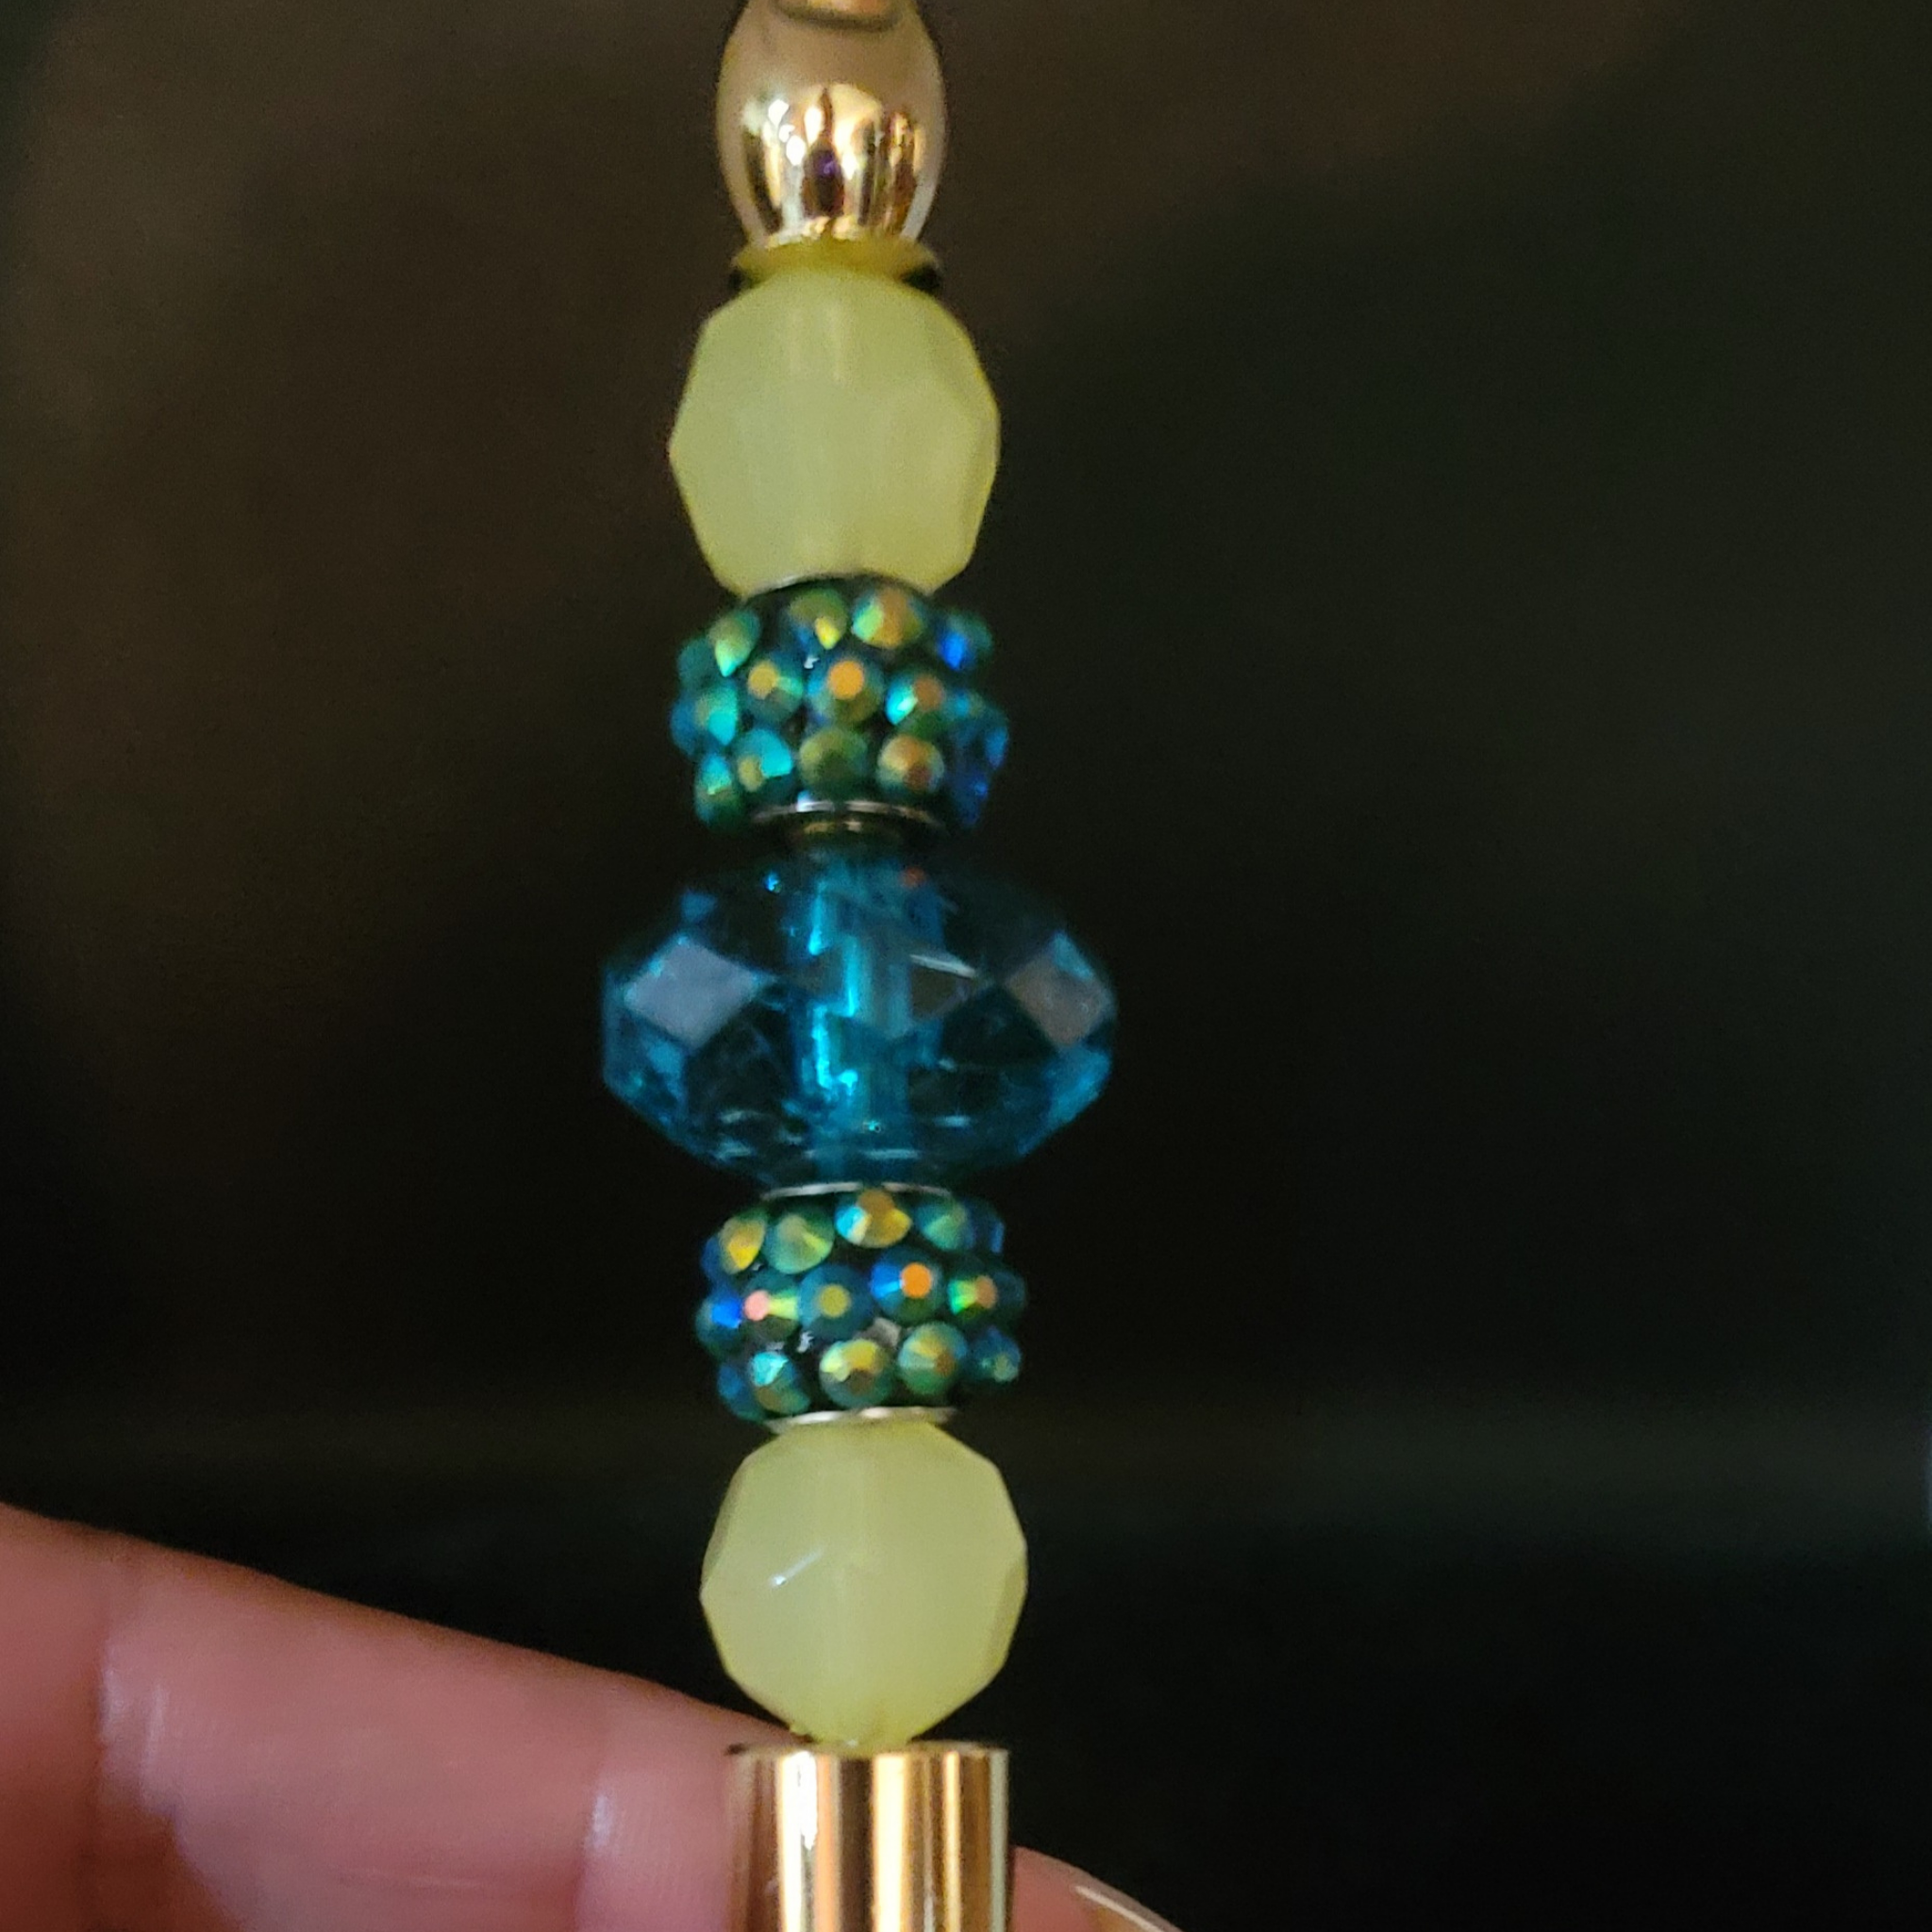 Kyla - Teal Blue, Pastel Yellow, & Gold Jeweled Ink Pen